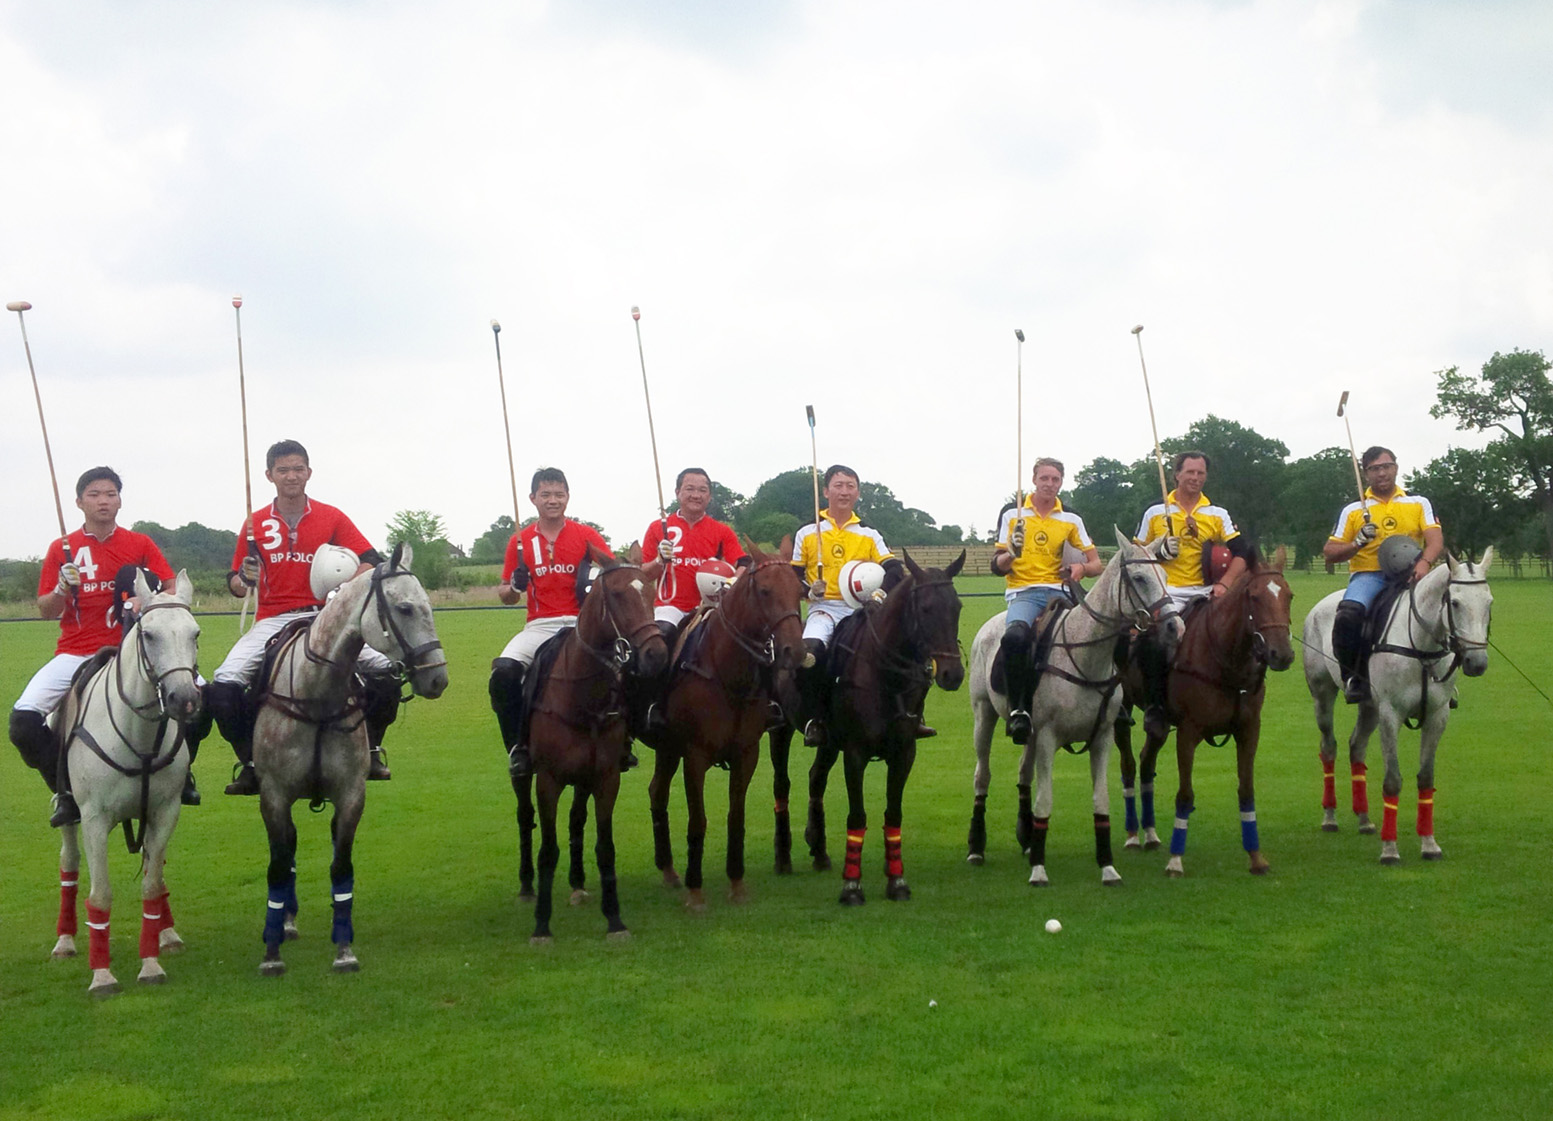 BP Polo vs Tang Polo Beijing in a Friendly Match Held in England